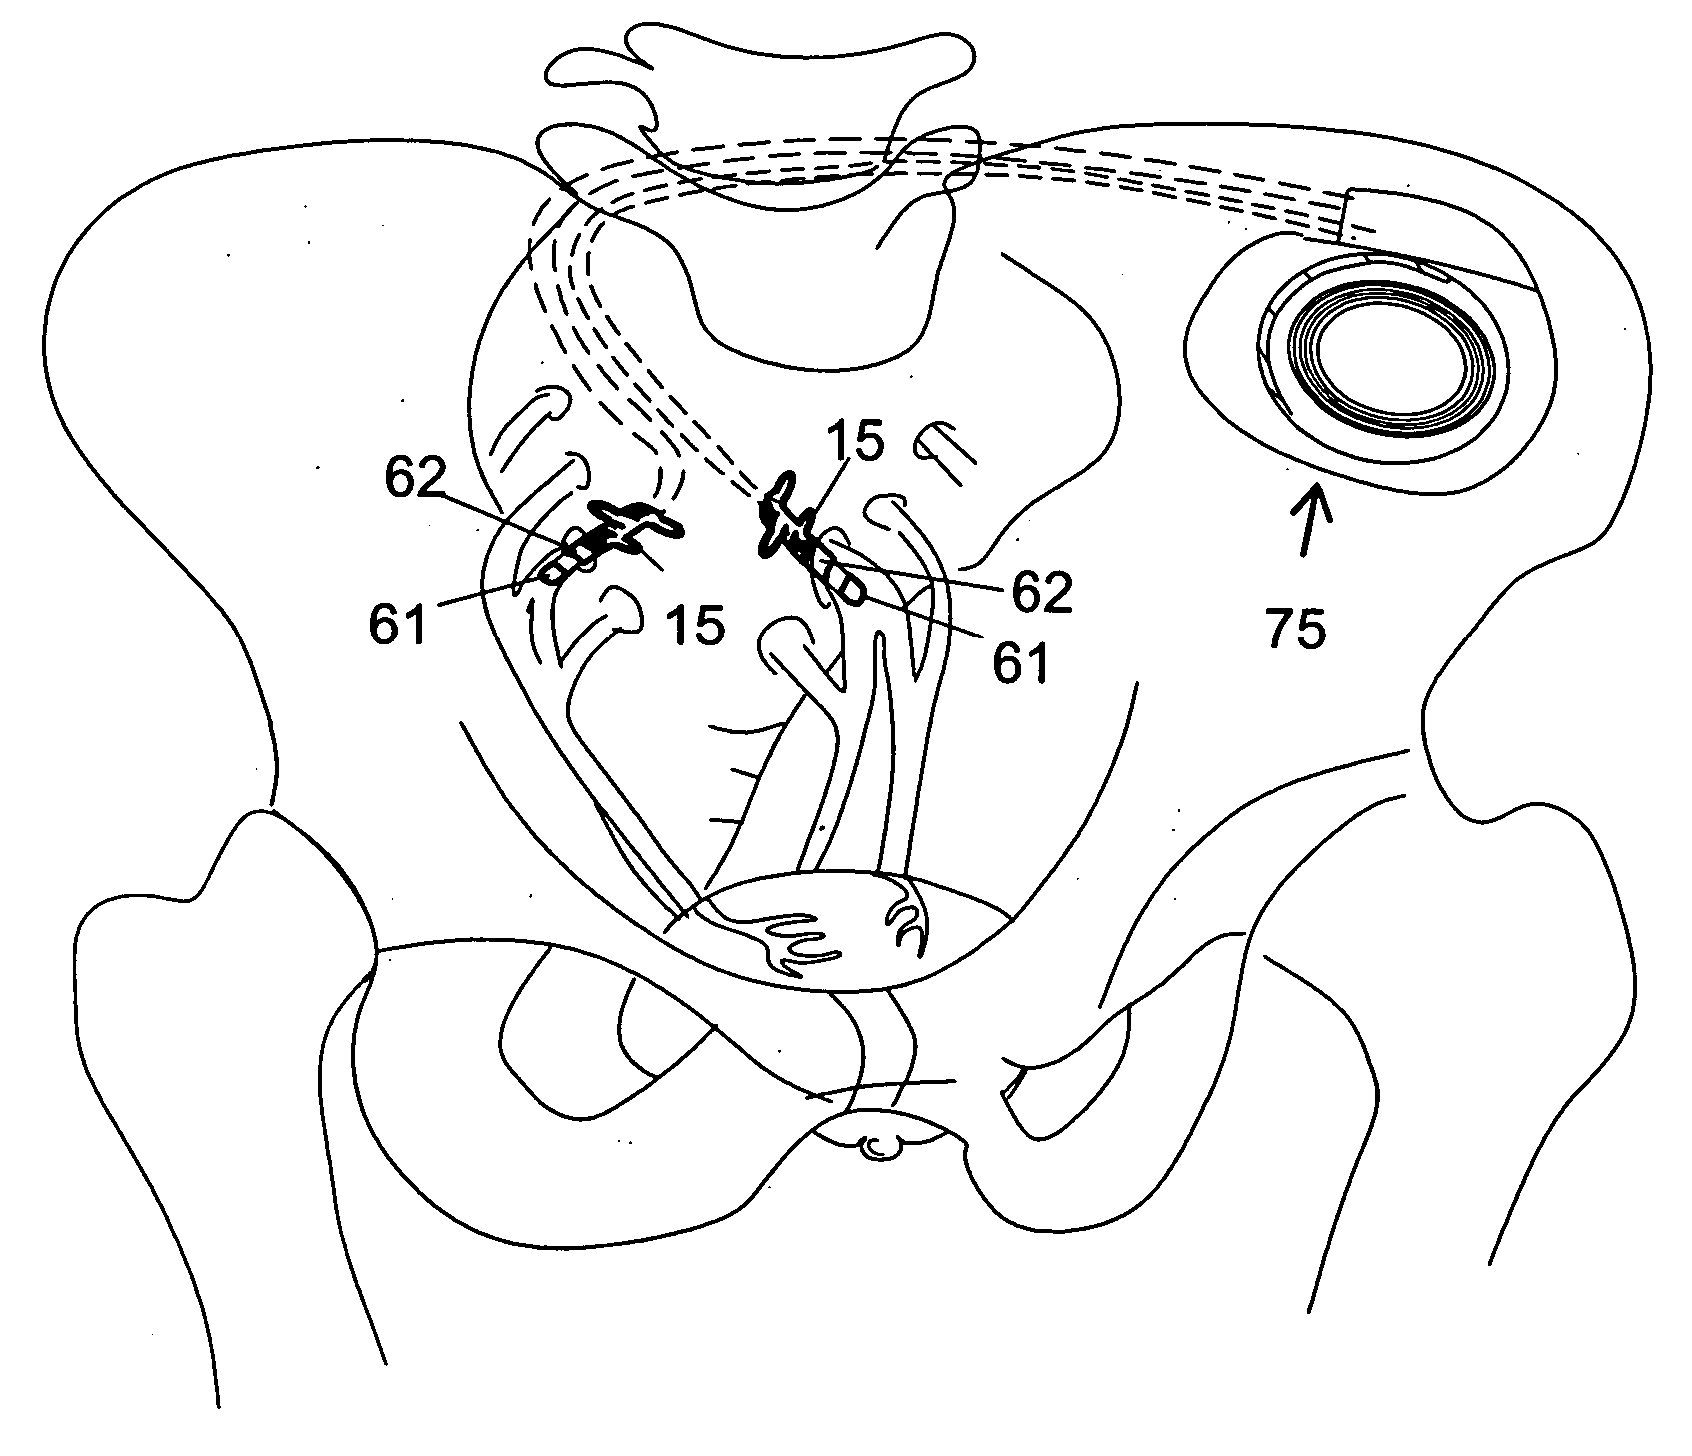 Method and system for modulating sacral nerves and/or its branches in a patient to provide therapy for urological disorders and/or fecal incontinence, using rectangular and/or complex electrical pulses